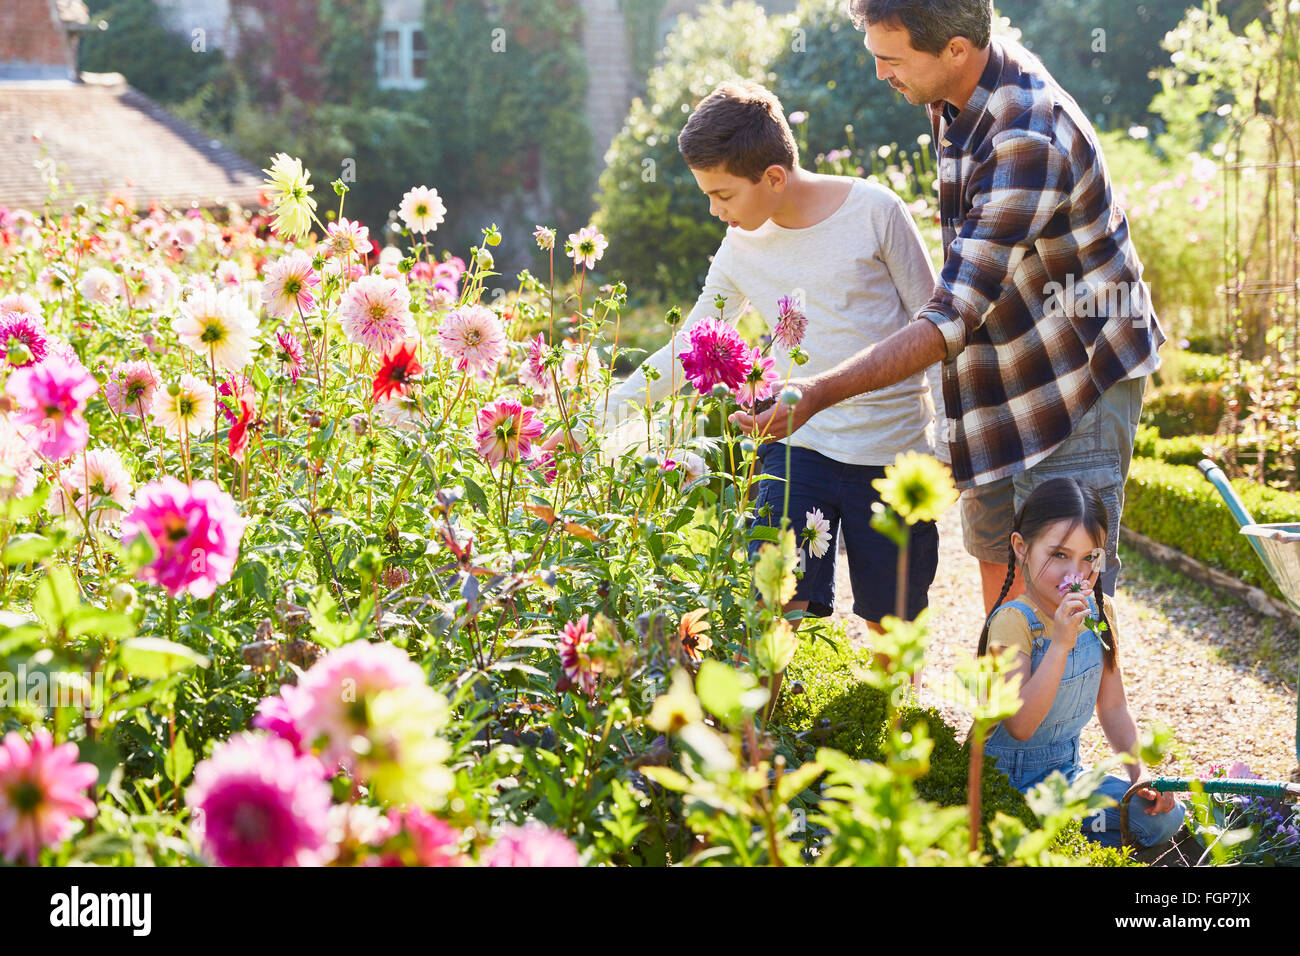 Father and son picking flowers in sunny garden Stock Photo